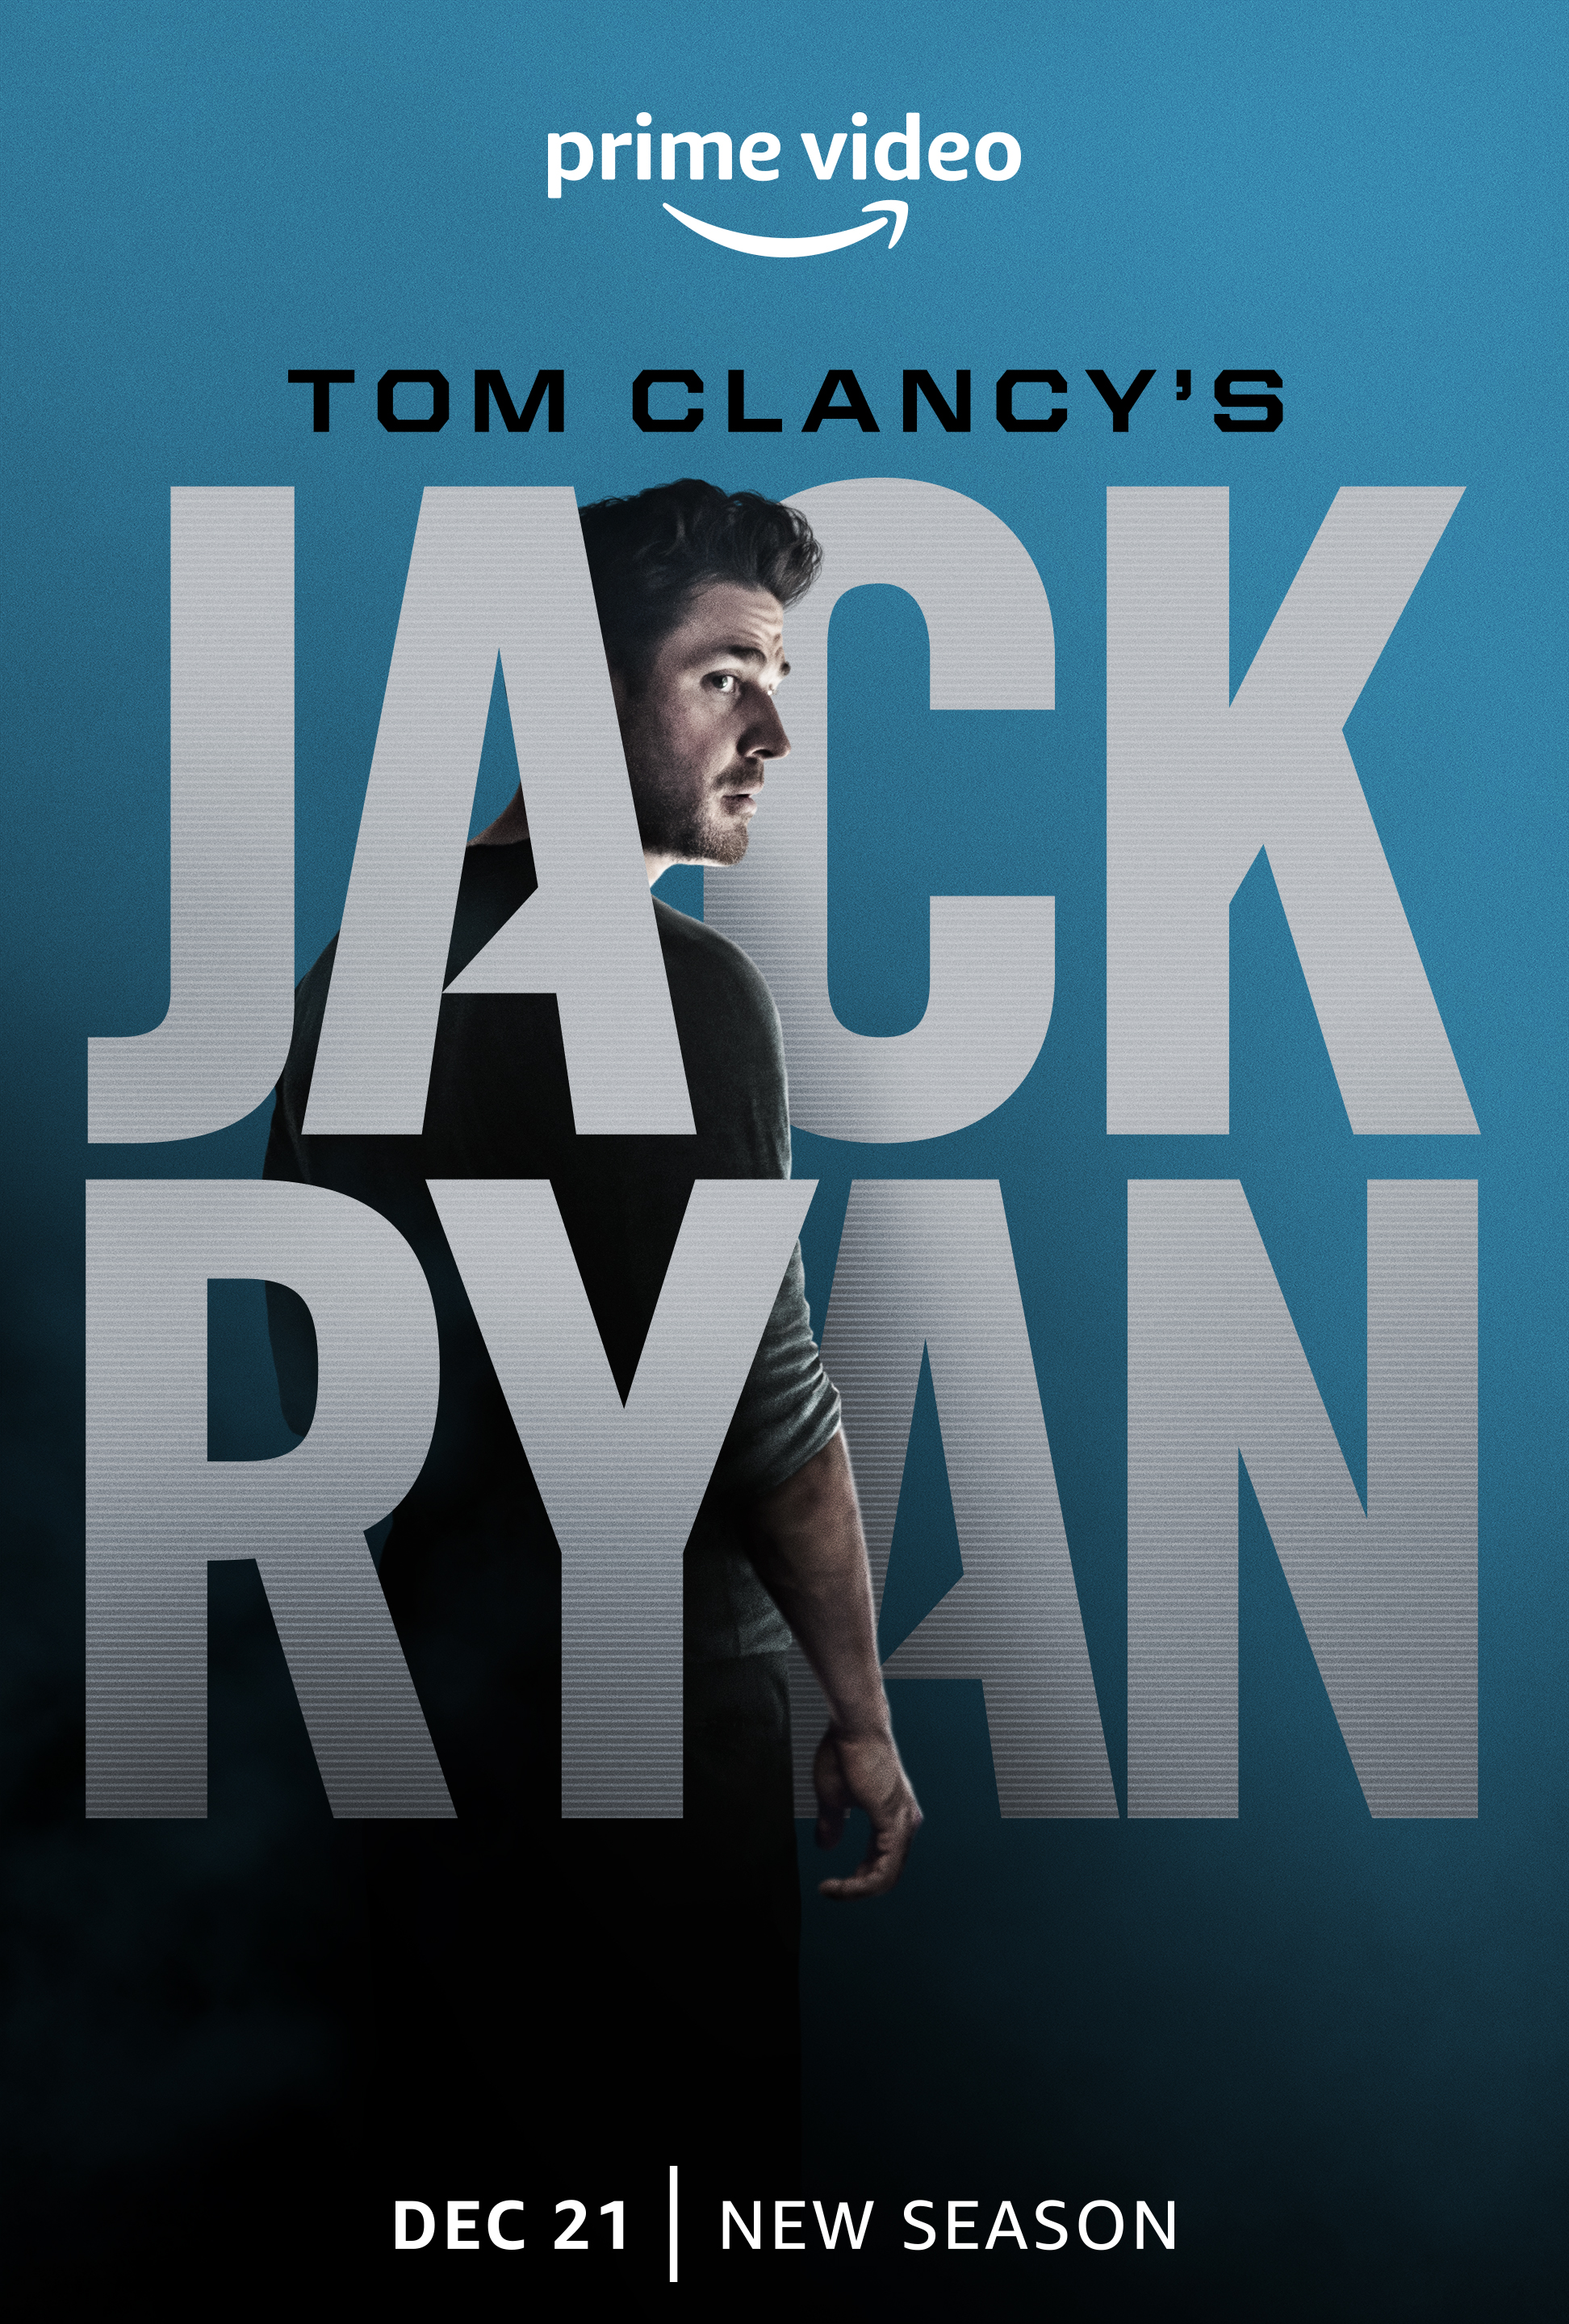 Geologi Som Mountaineer Jack Ryan Season 3 | Review, 5 things I liked and disliked about it